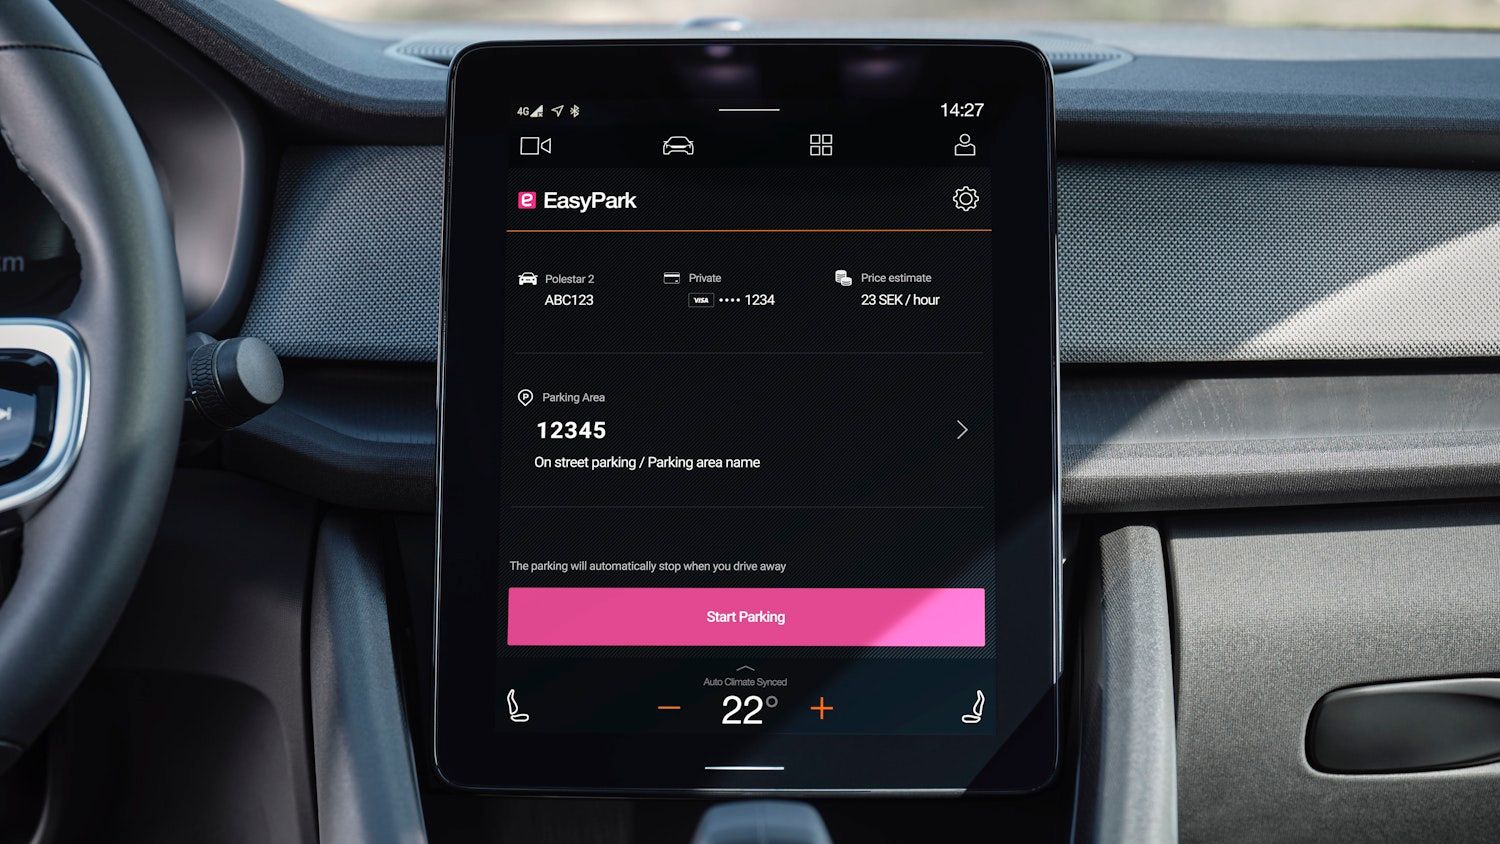 In-car display showing features of the EasyPark app.